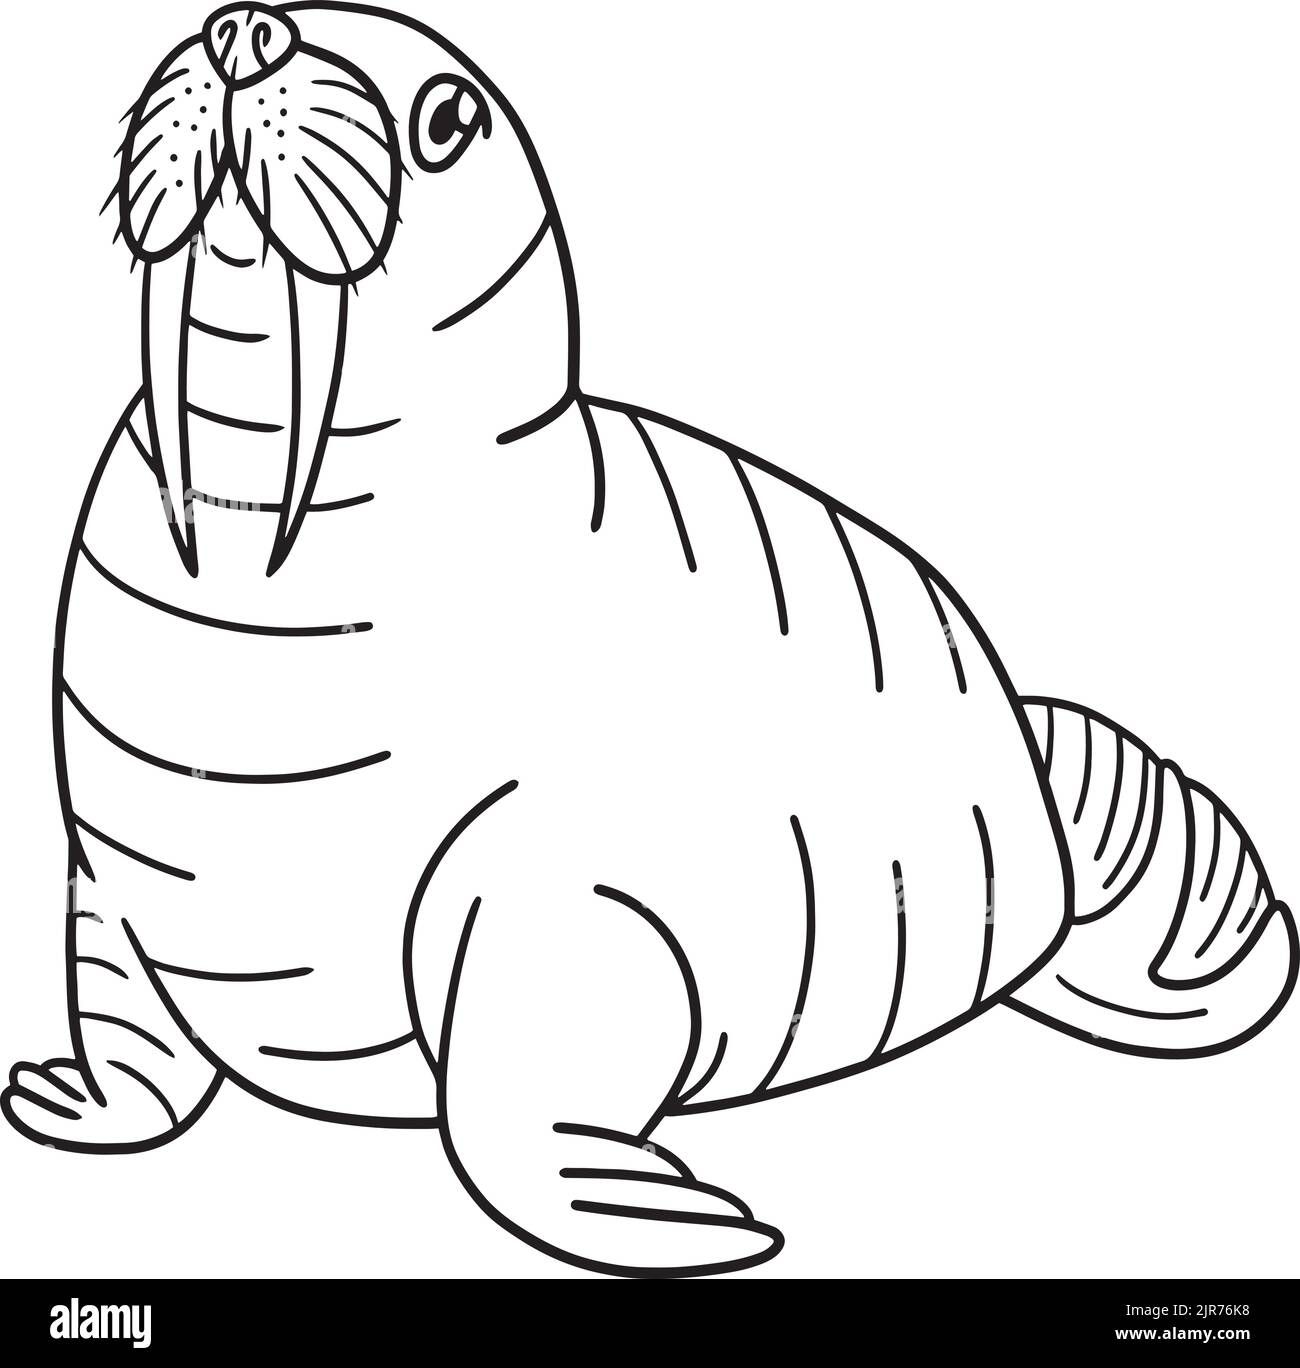 Walrus Isolated Coloring Page for Kids Stock Vector